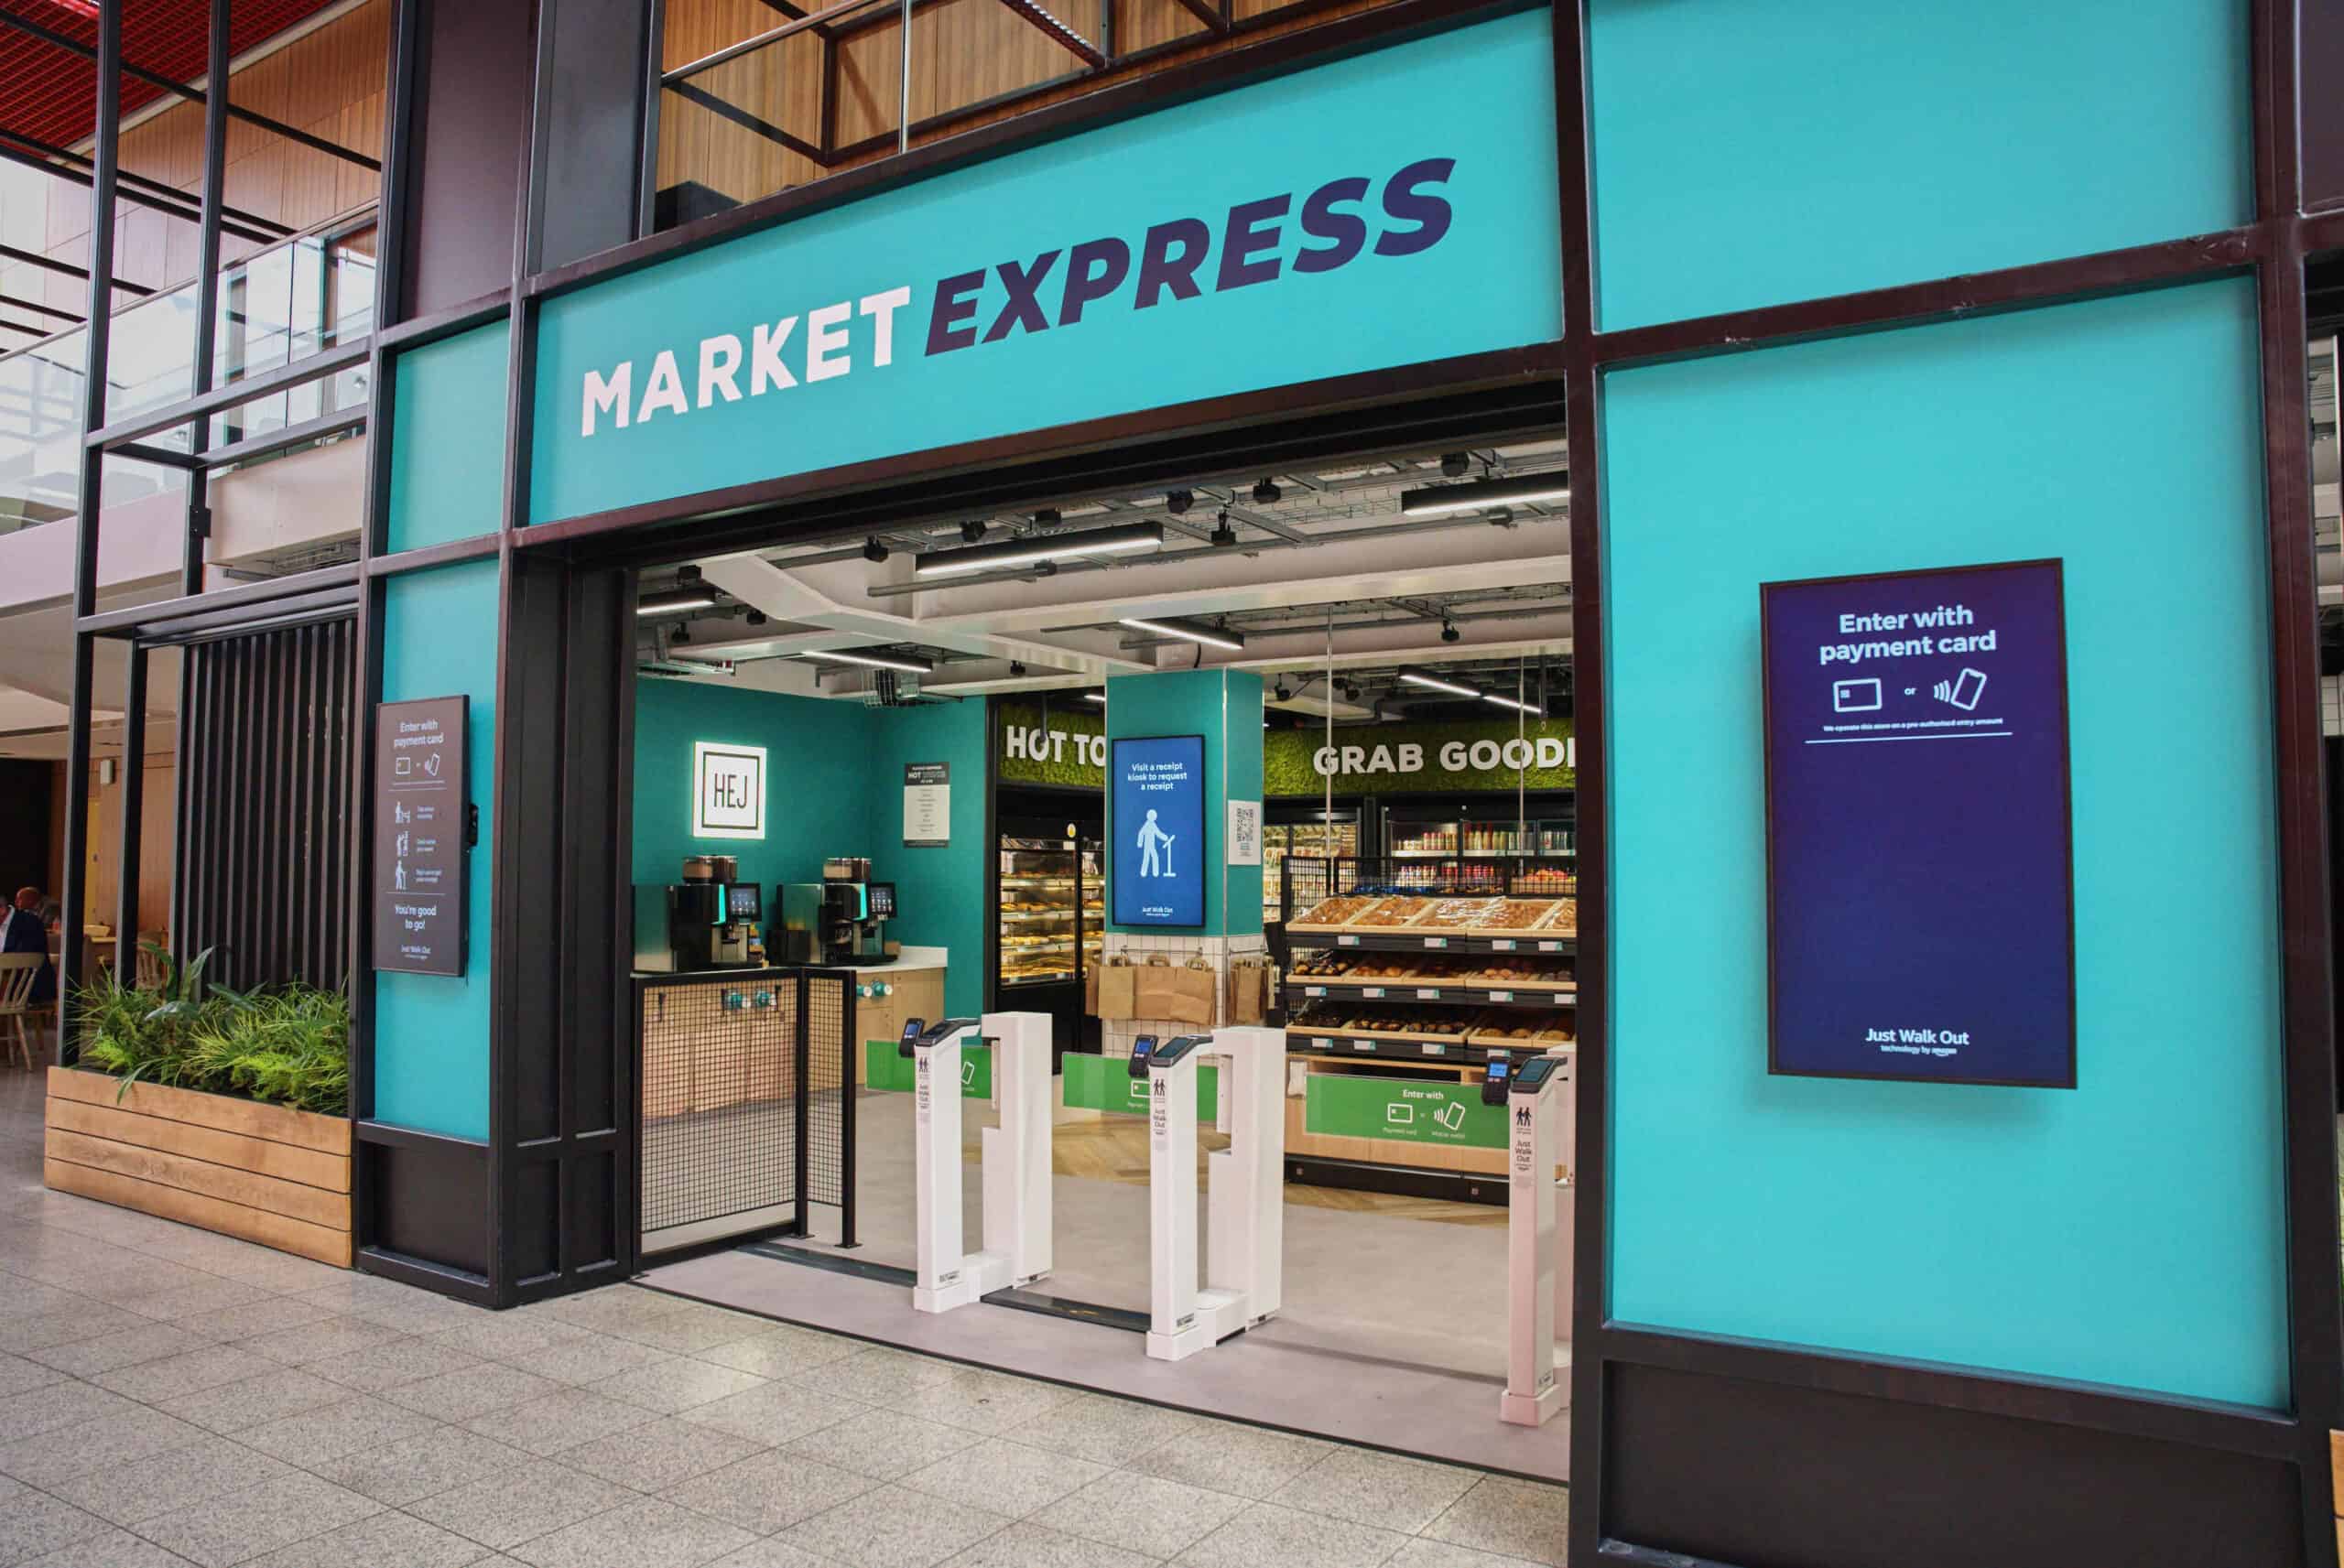 Market Express uses Amazon Just Walk Out technology